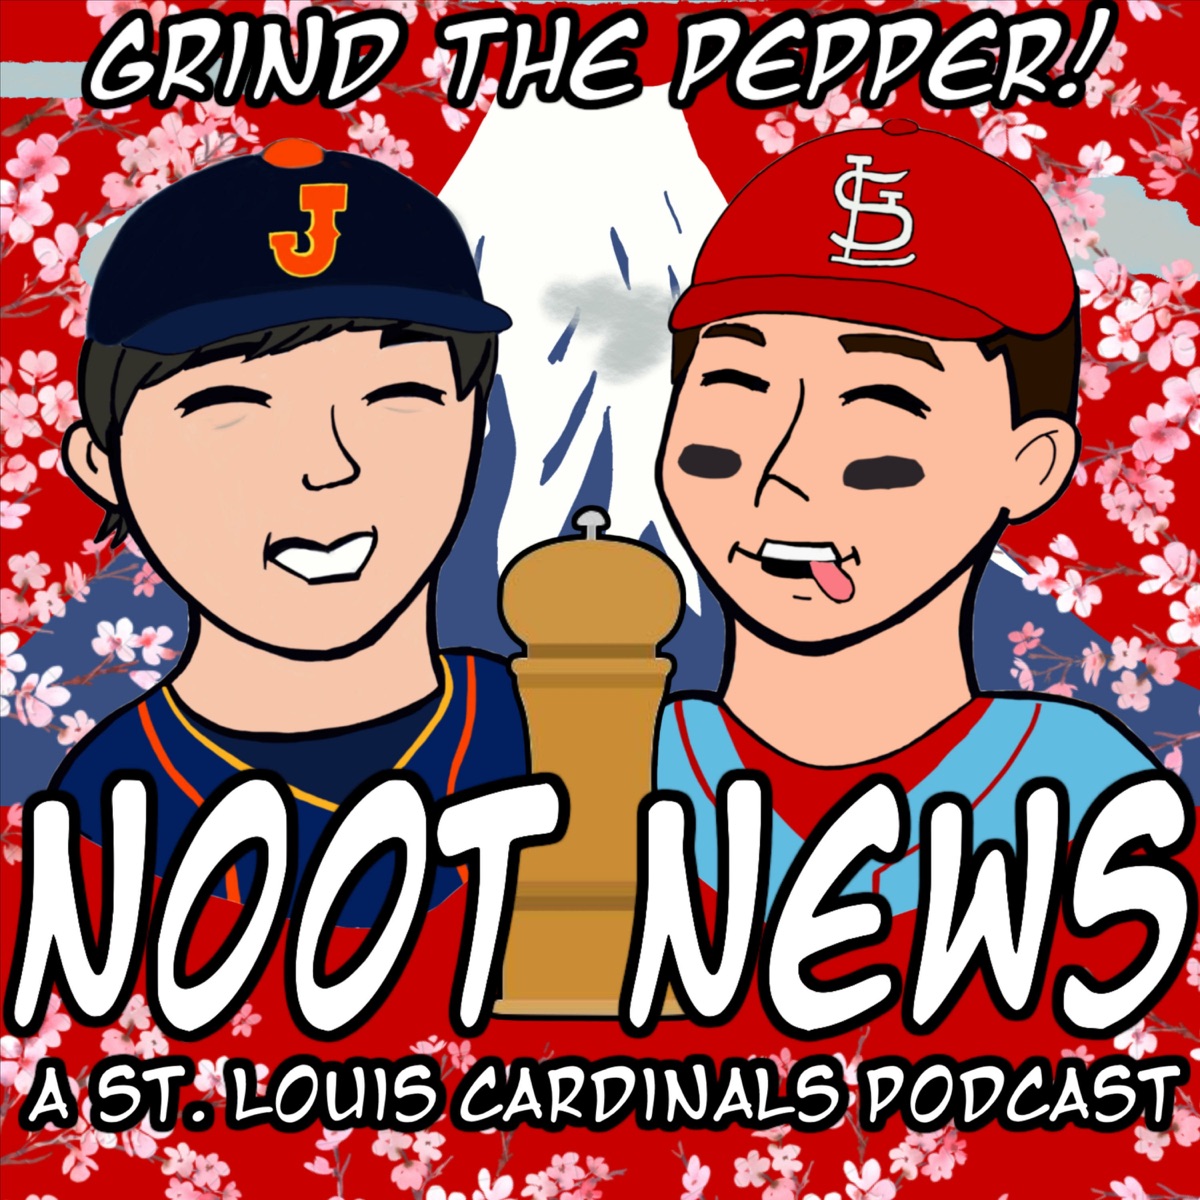 Noot News: A St. Louis Cardinals Podcast – Podcast – Podtail